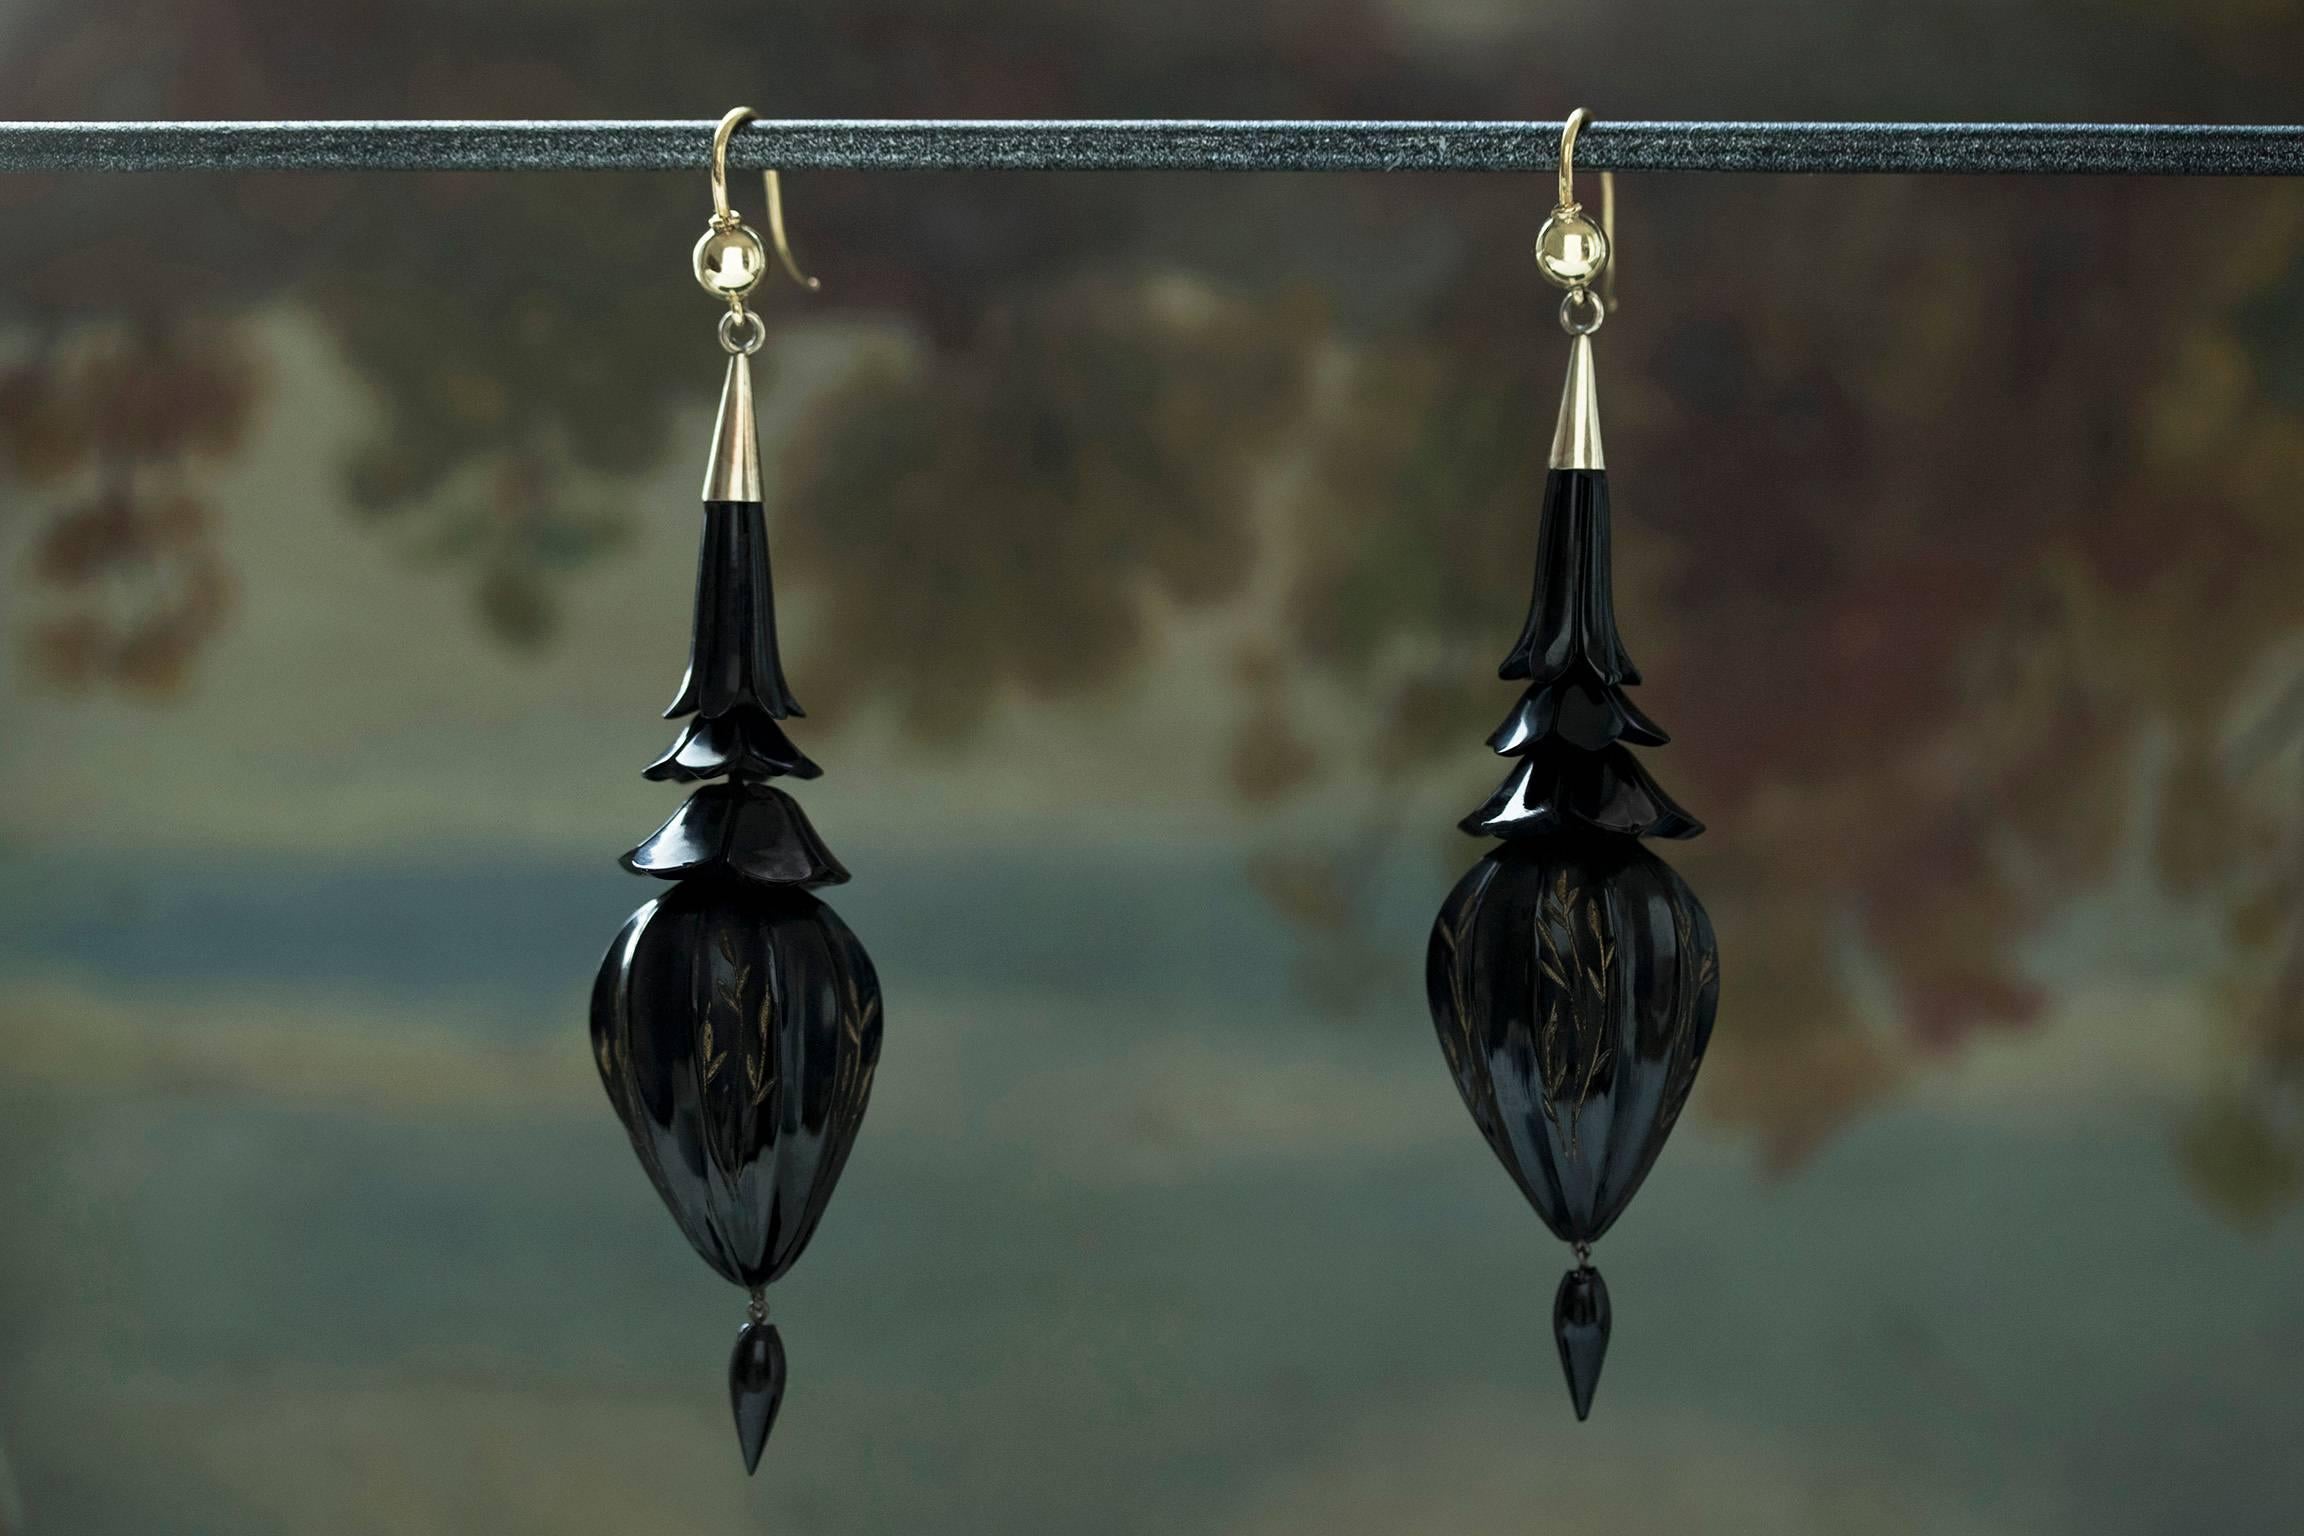 C.1880. A gorgeous pair of Victorian carved Whitby jet drop earrings. The earrings have three-tier fluted tops, and the lower body of the earrings shows beautiful etching on it. They are very wearable/lightweight, and give lovely movement when worn.